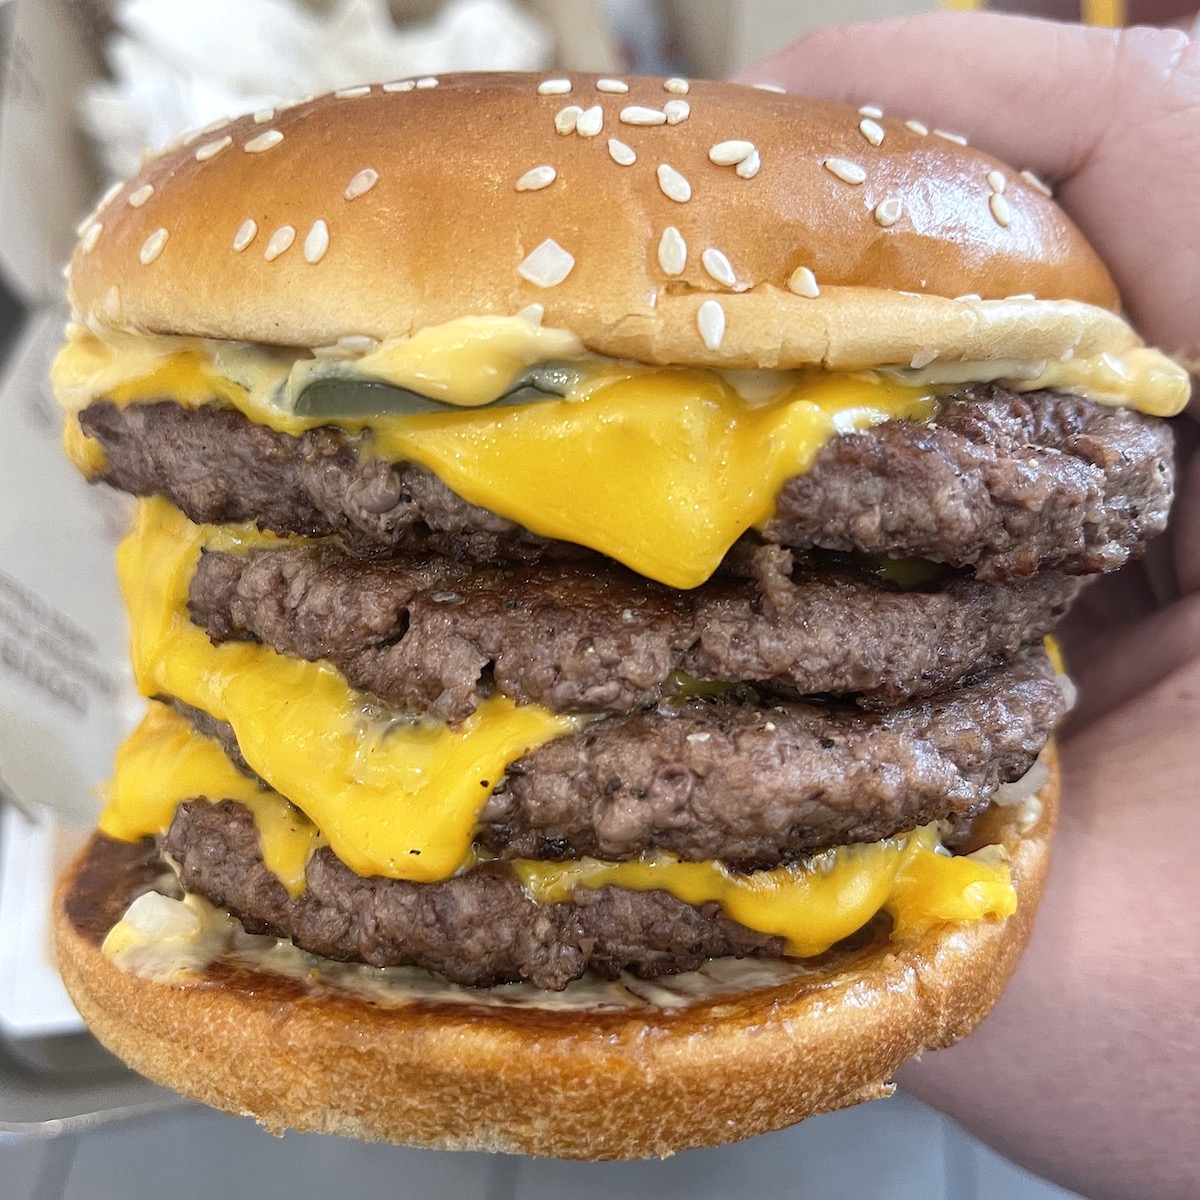 Holding the McDonald's Quadruple Quarter Pounder with Cheese